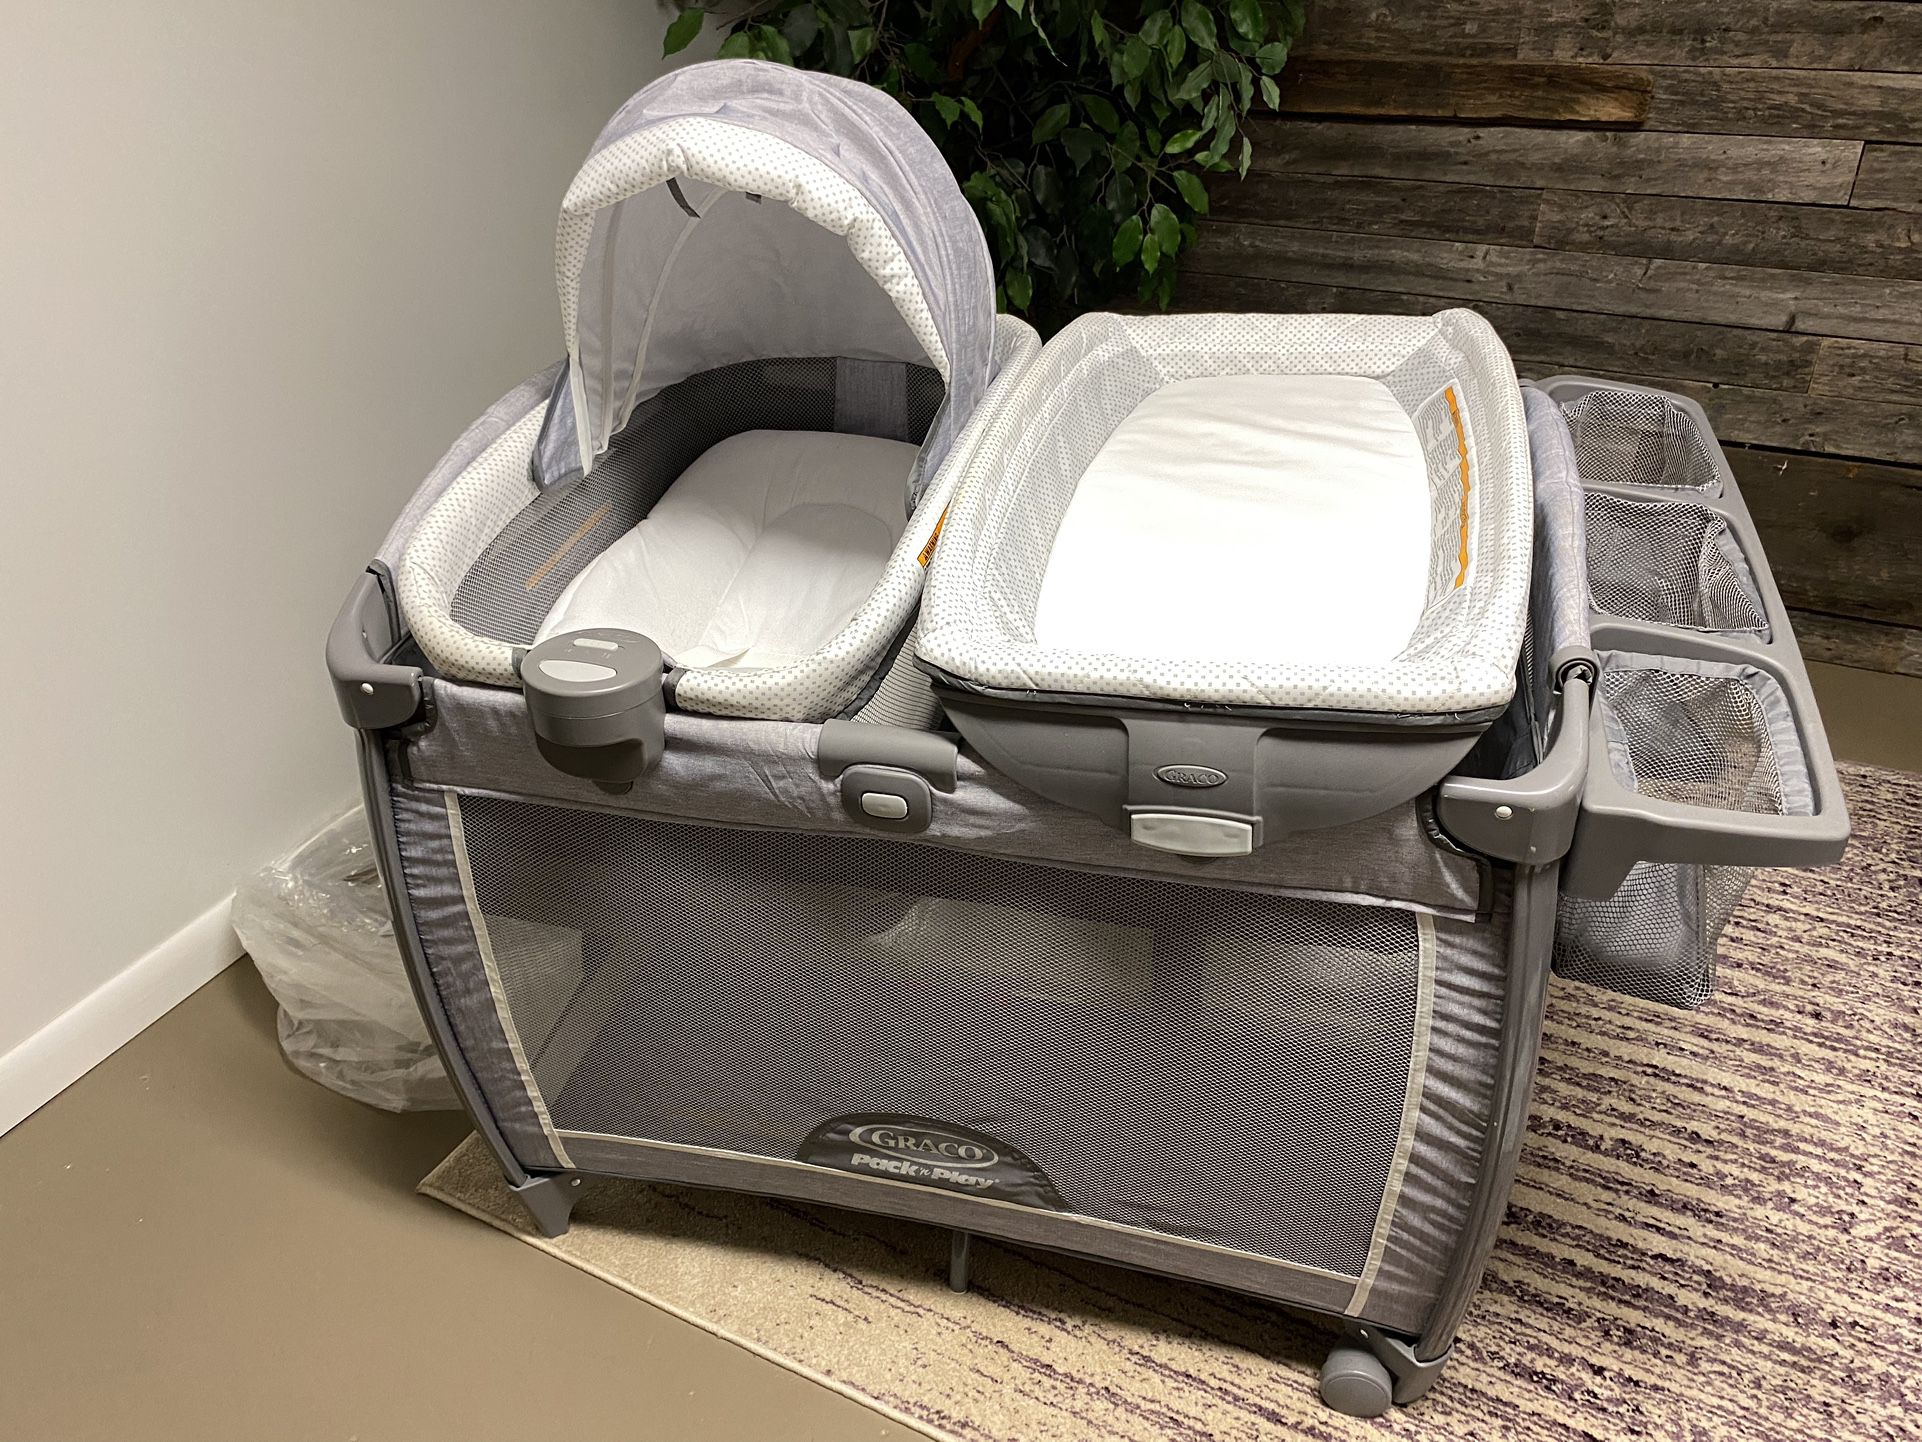 Graco Deluxe Pack And Play  Bassinet And Changing Table 